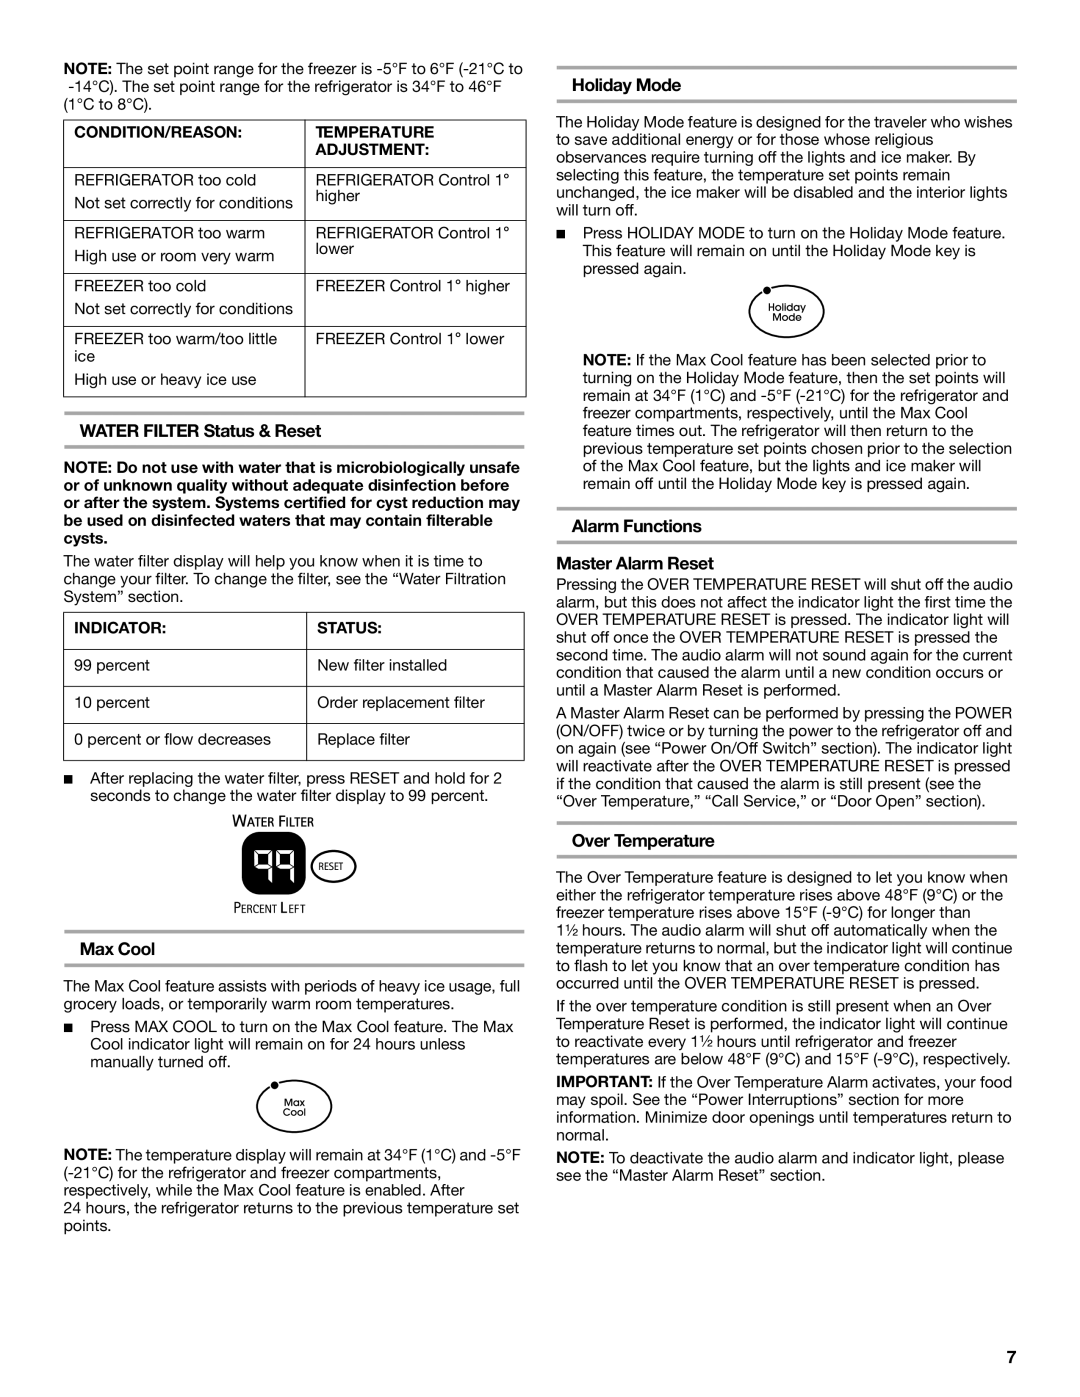 KitchenAid Side-by-Side Referigerator manual Water Filter Status & Reset, Holiday Mode, Alarm Functions Master Alarm Reset 